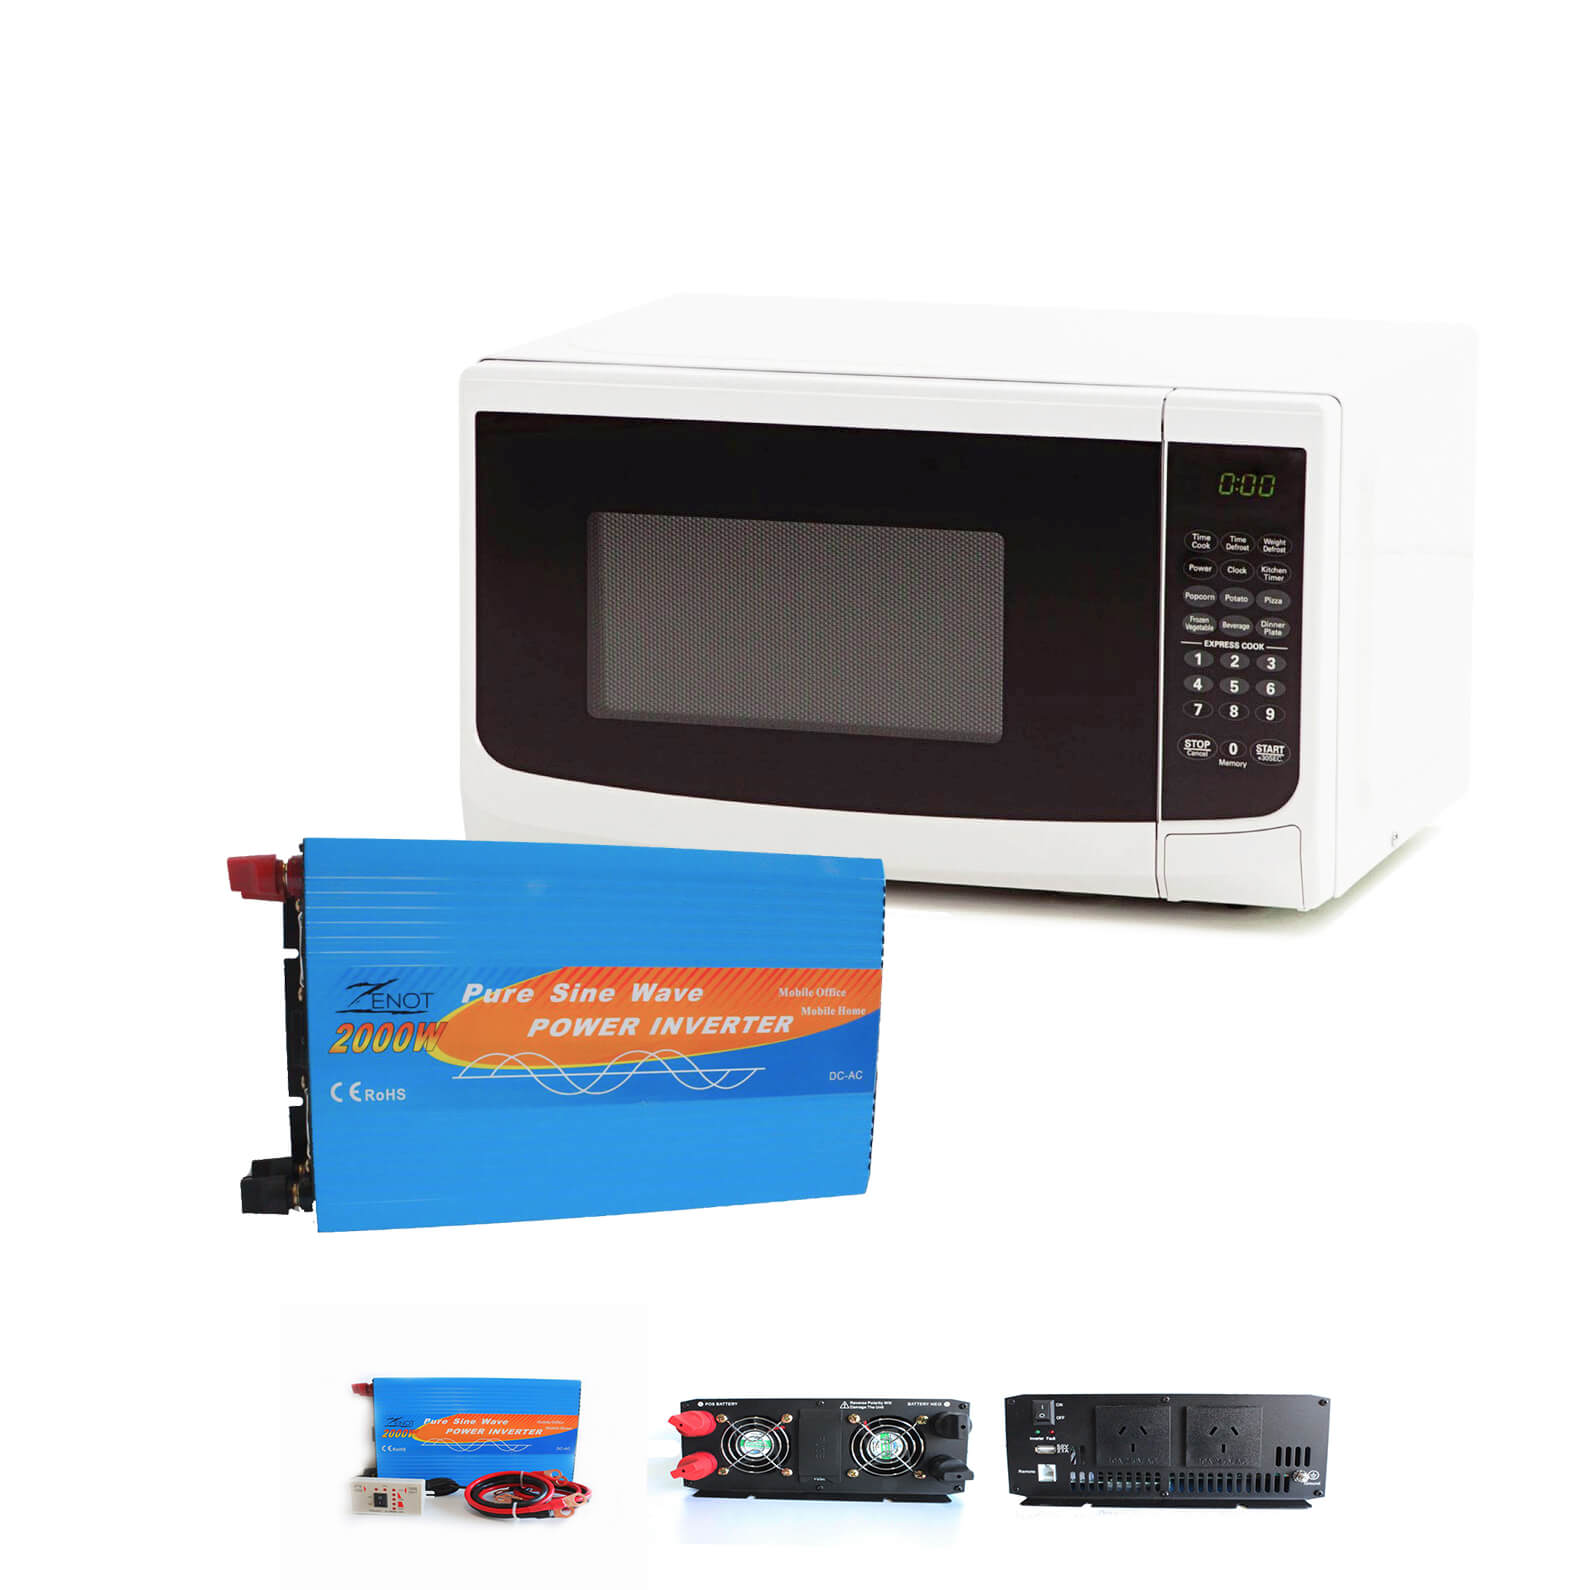 12 VOLT ZENOT 700W Camping Microwave & 2000W Inverter Package | All 12 Volt